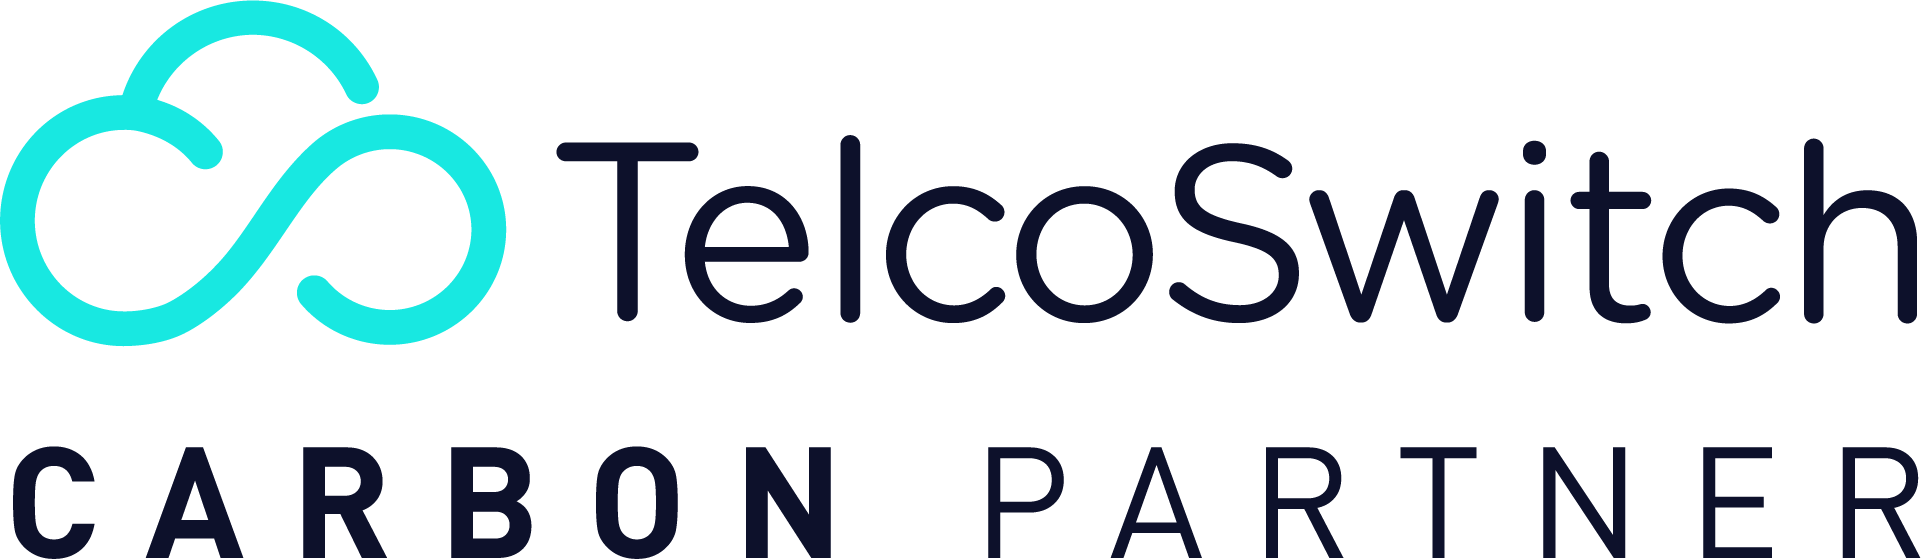 Telco Switch Carbon Partner